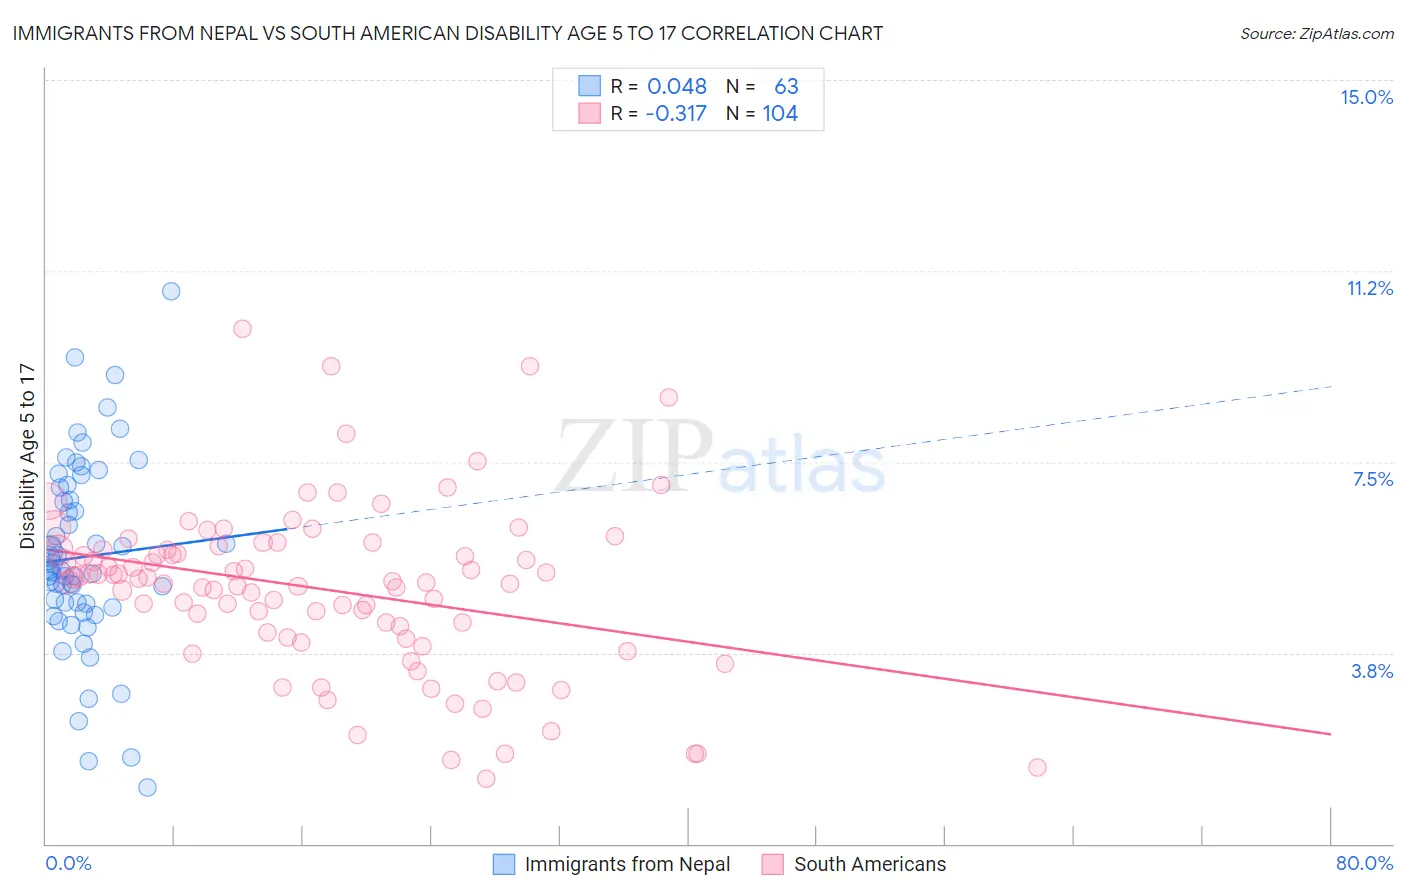 Immigrants from Nepal vs South American Disability Age 5 to 17